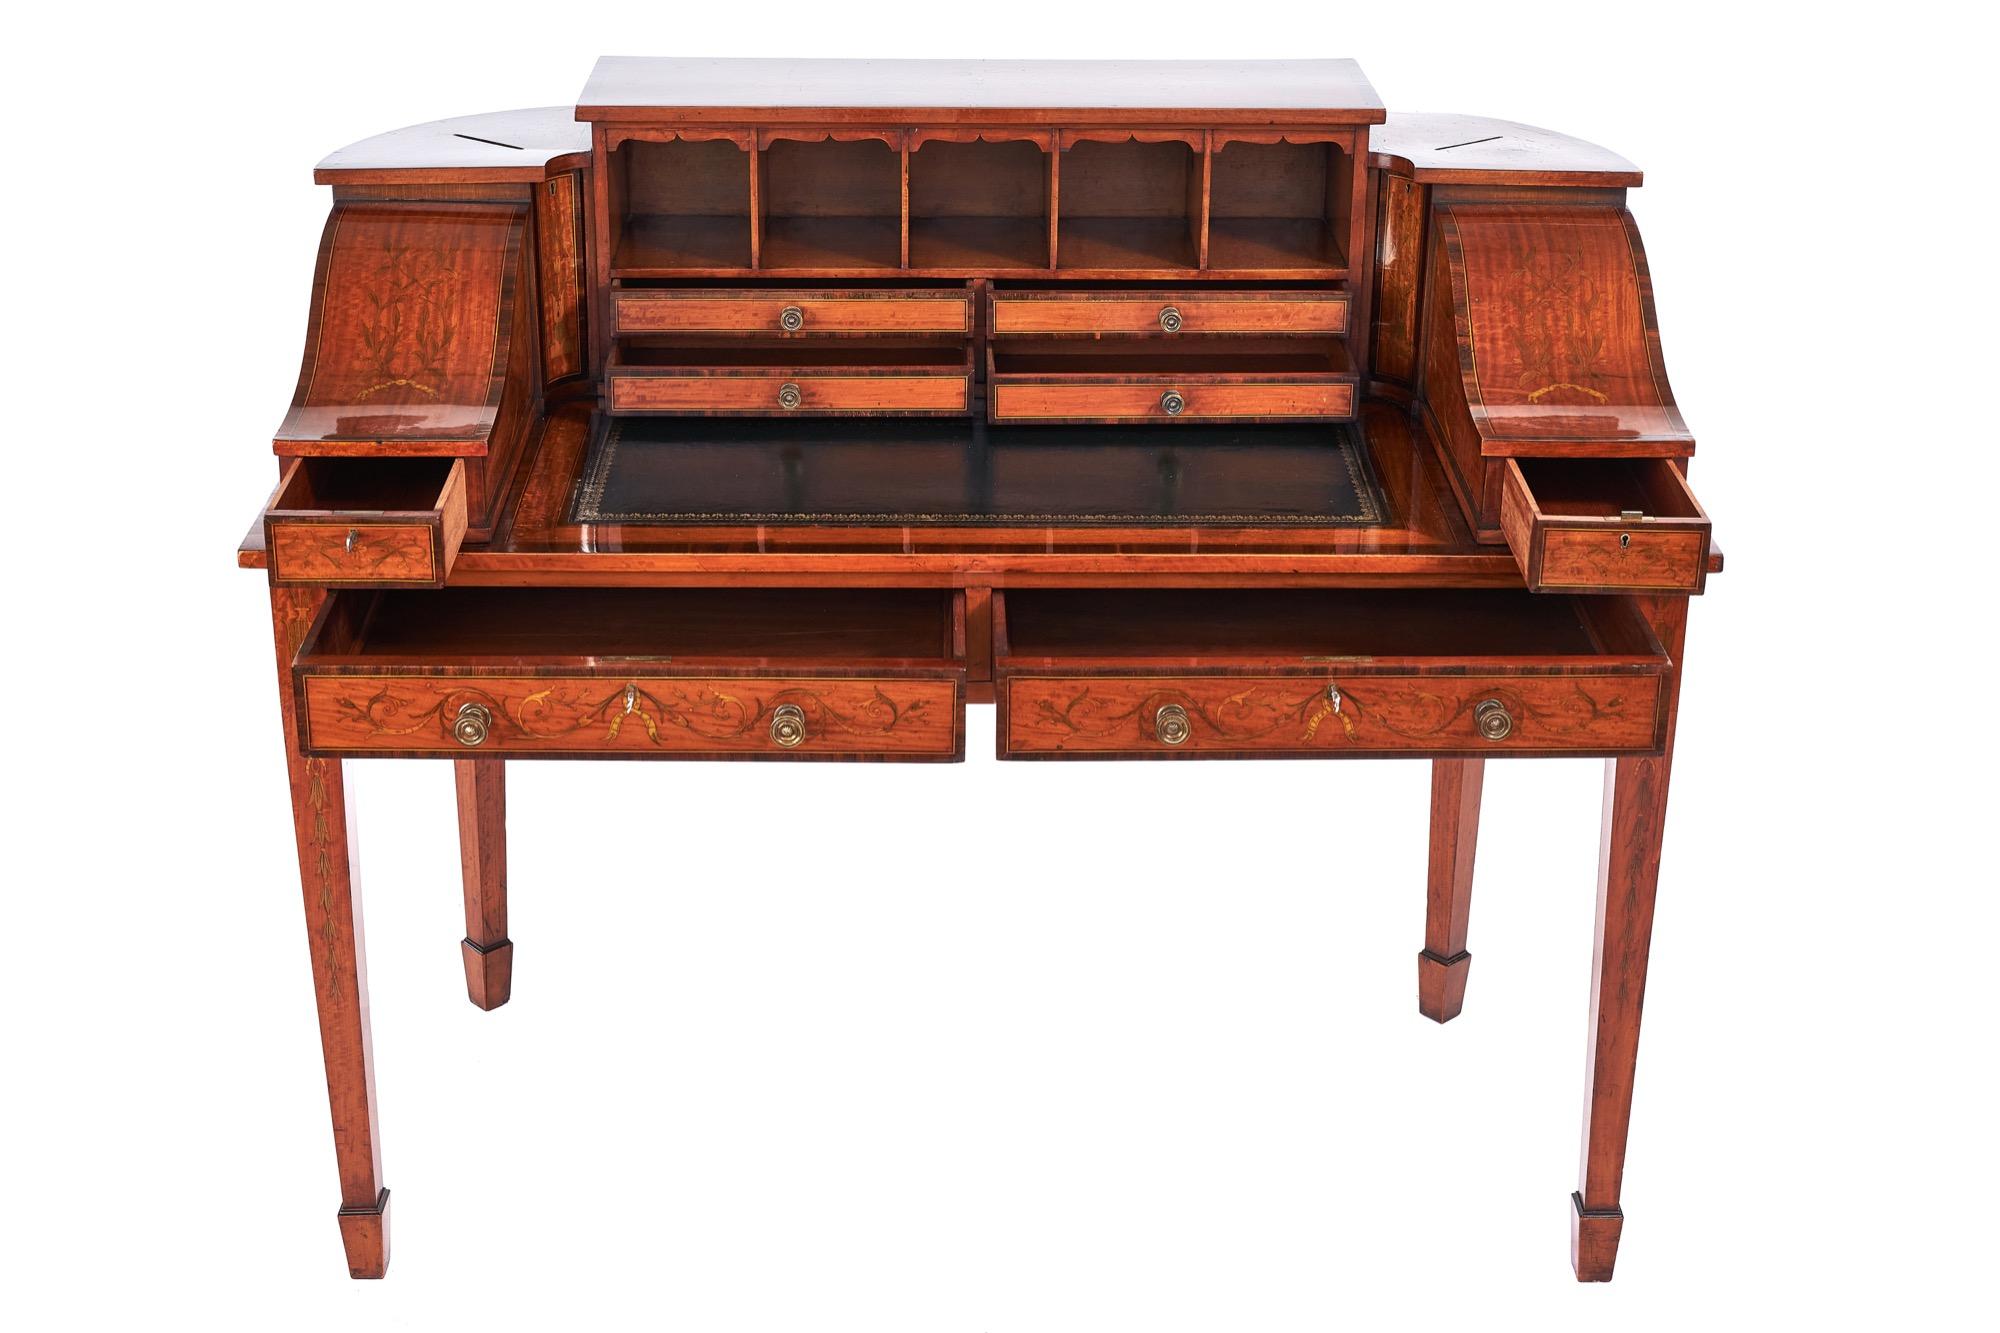 Fine Sheraton Revival Satinwood inlaid Carlton House desk. with Letter boxes. circa 1880s
Profusely inlaid with : swags, shells, urns, bell flowers & foliage decoration,
Satinwood, with Rosewood banding, boxwood line inlay, 
Curved back,
Black